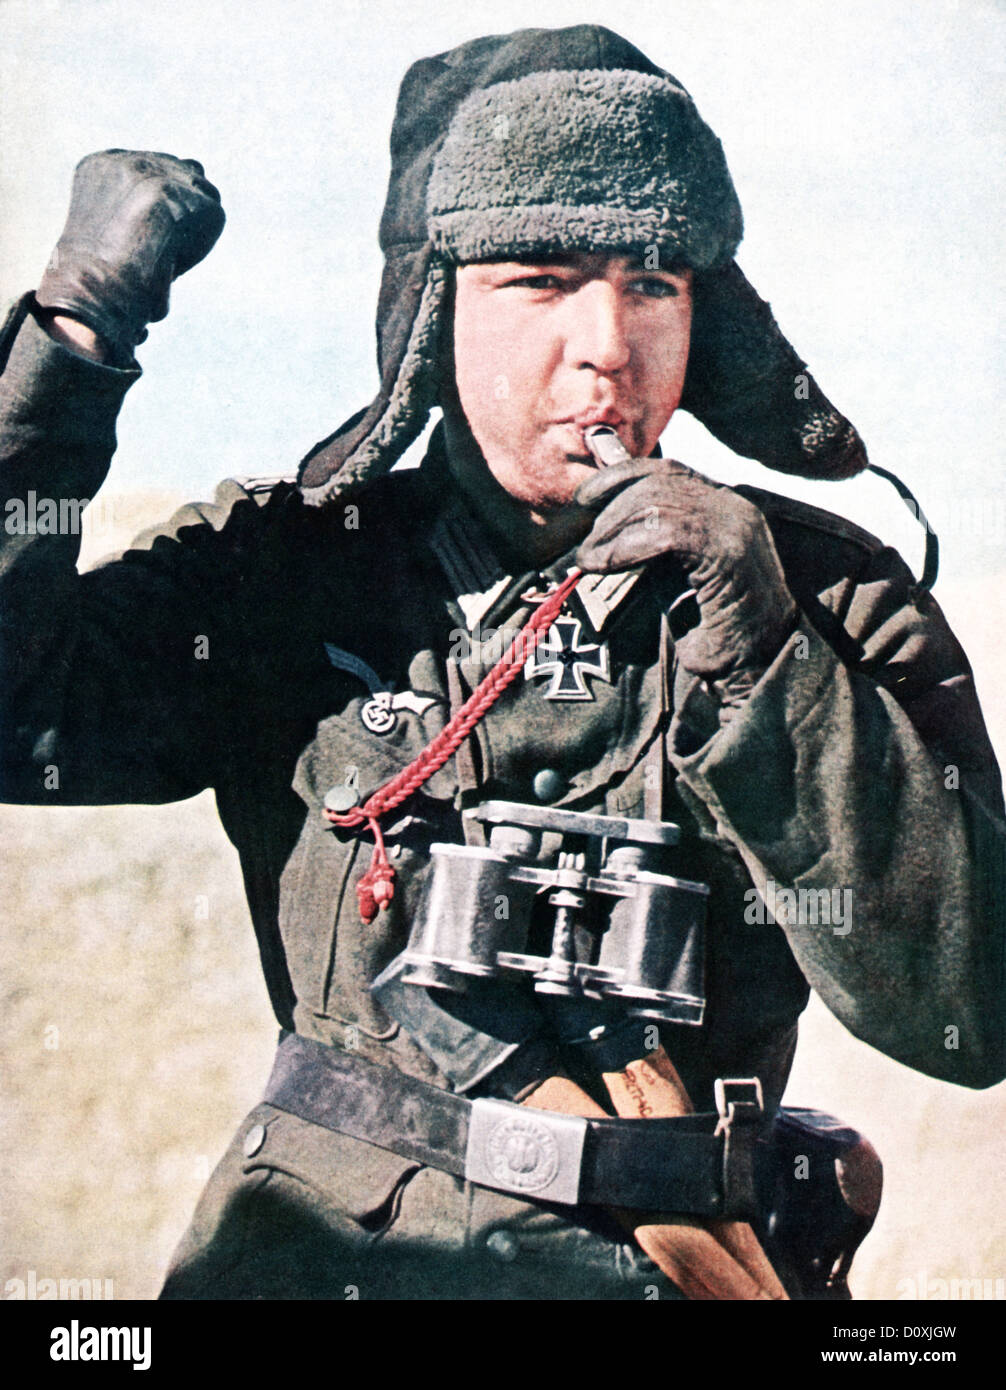 Operation, Barbarossa, Wehrmacht, troops, Russia, invasion, USSR, tank commander, pipe, World War II, Soviet Union, 1942, army Stock Photo